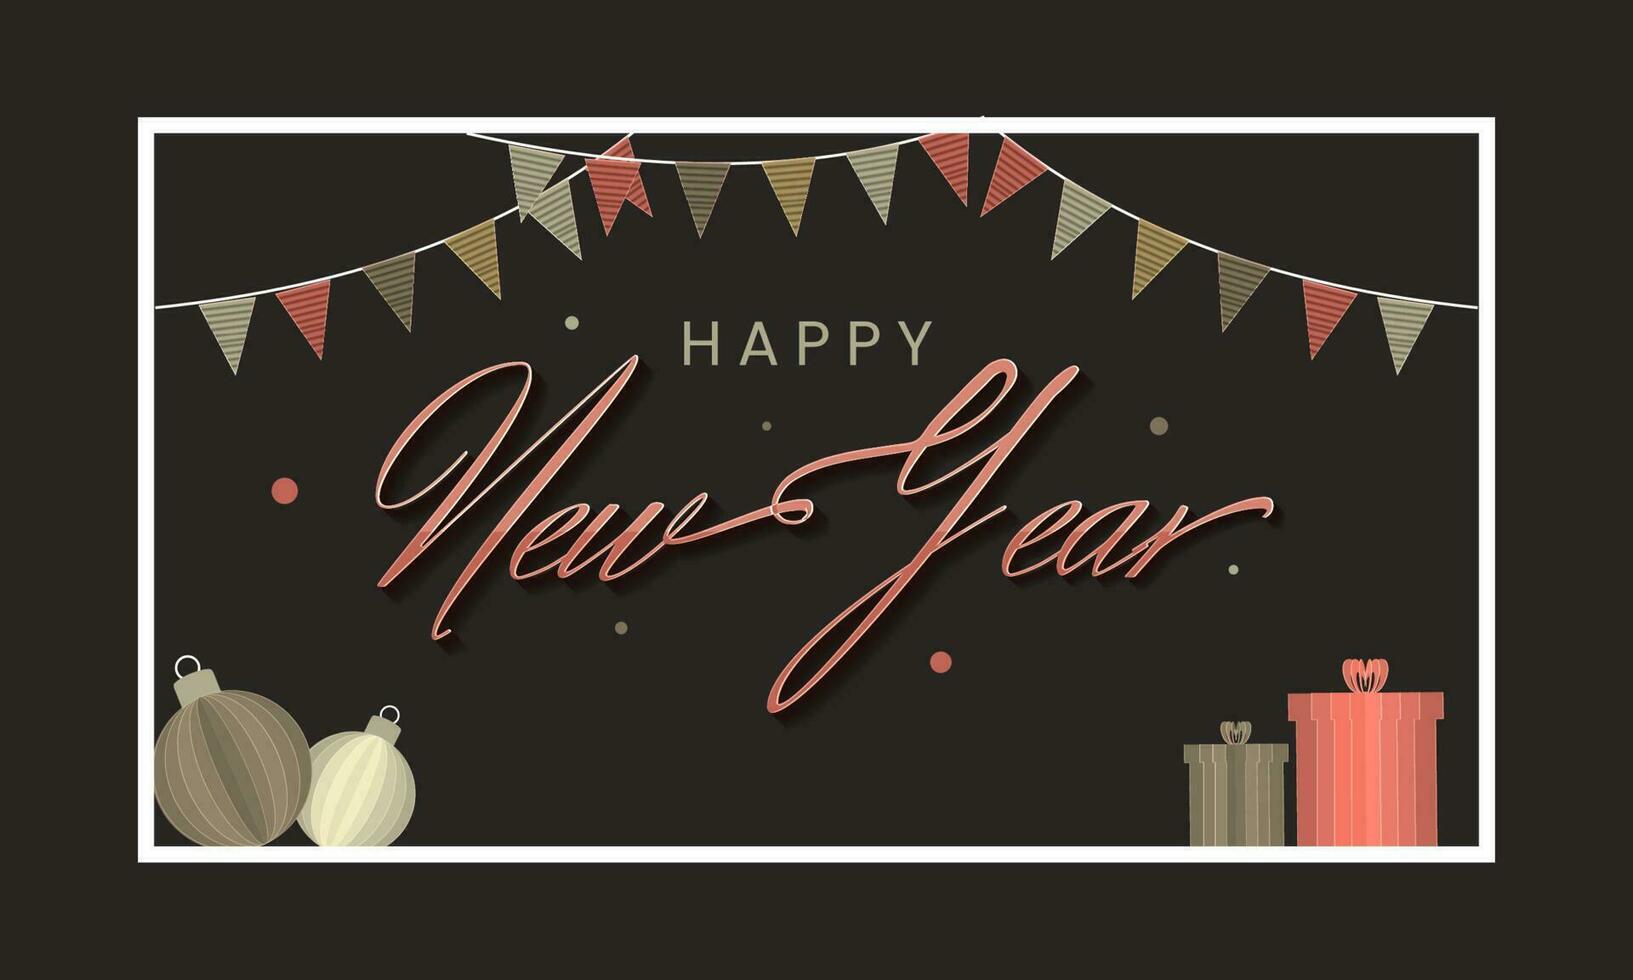 Happy New Year Font With Paper Cut Baubles, Gift Boxes And Party Flags Decorated On Black Background. vector